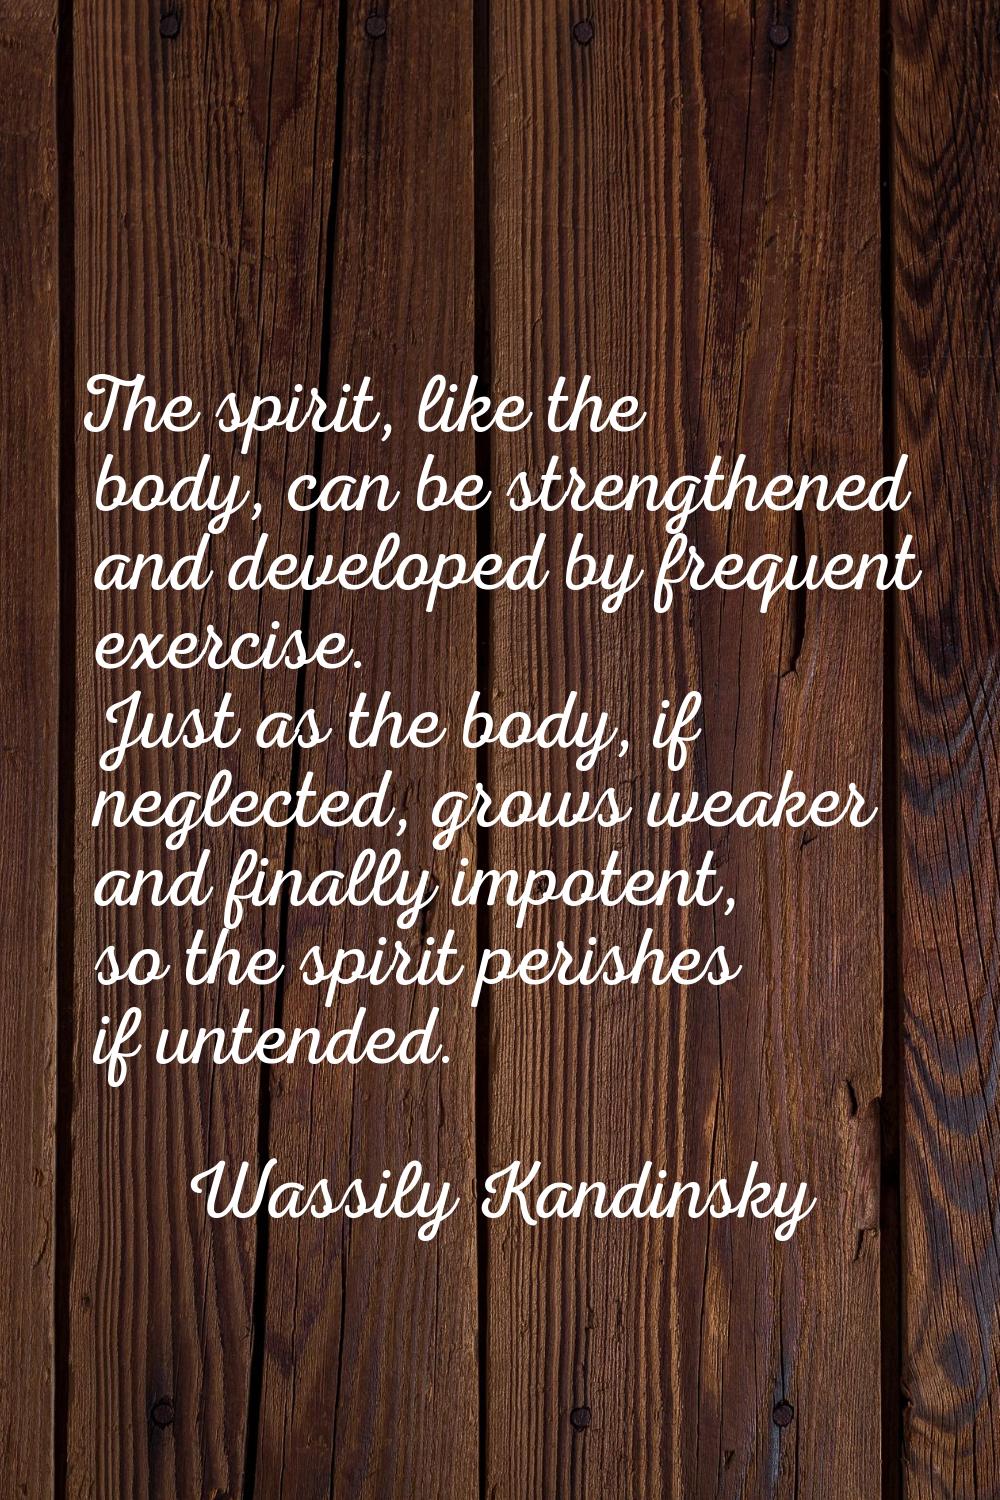 The spirit, like the body, can be strengthened and developed by frequent exercise. Just as the body